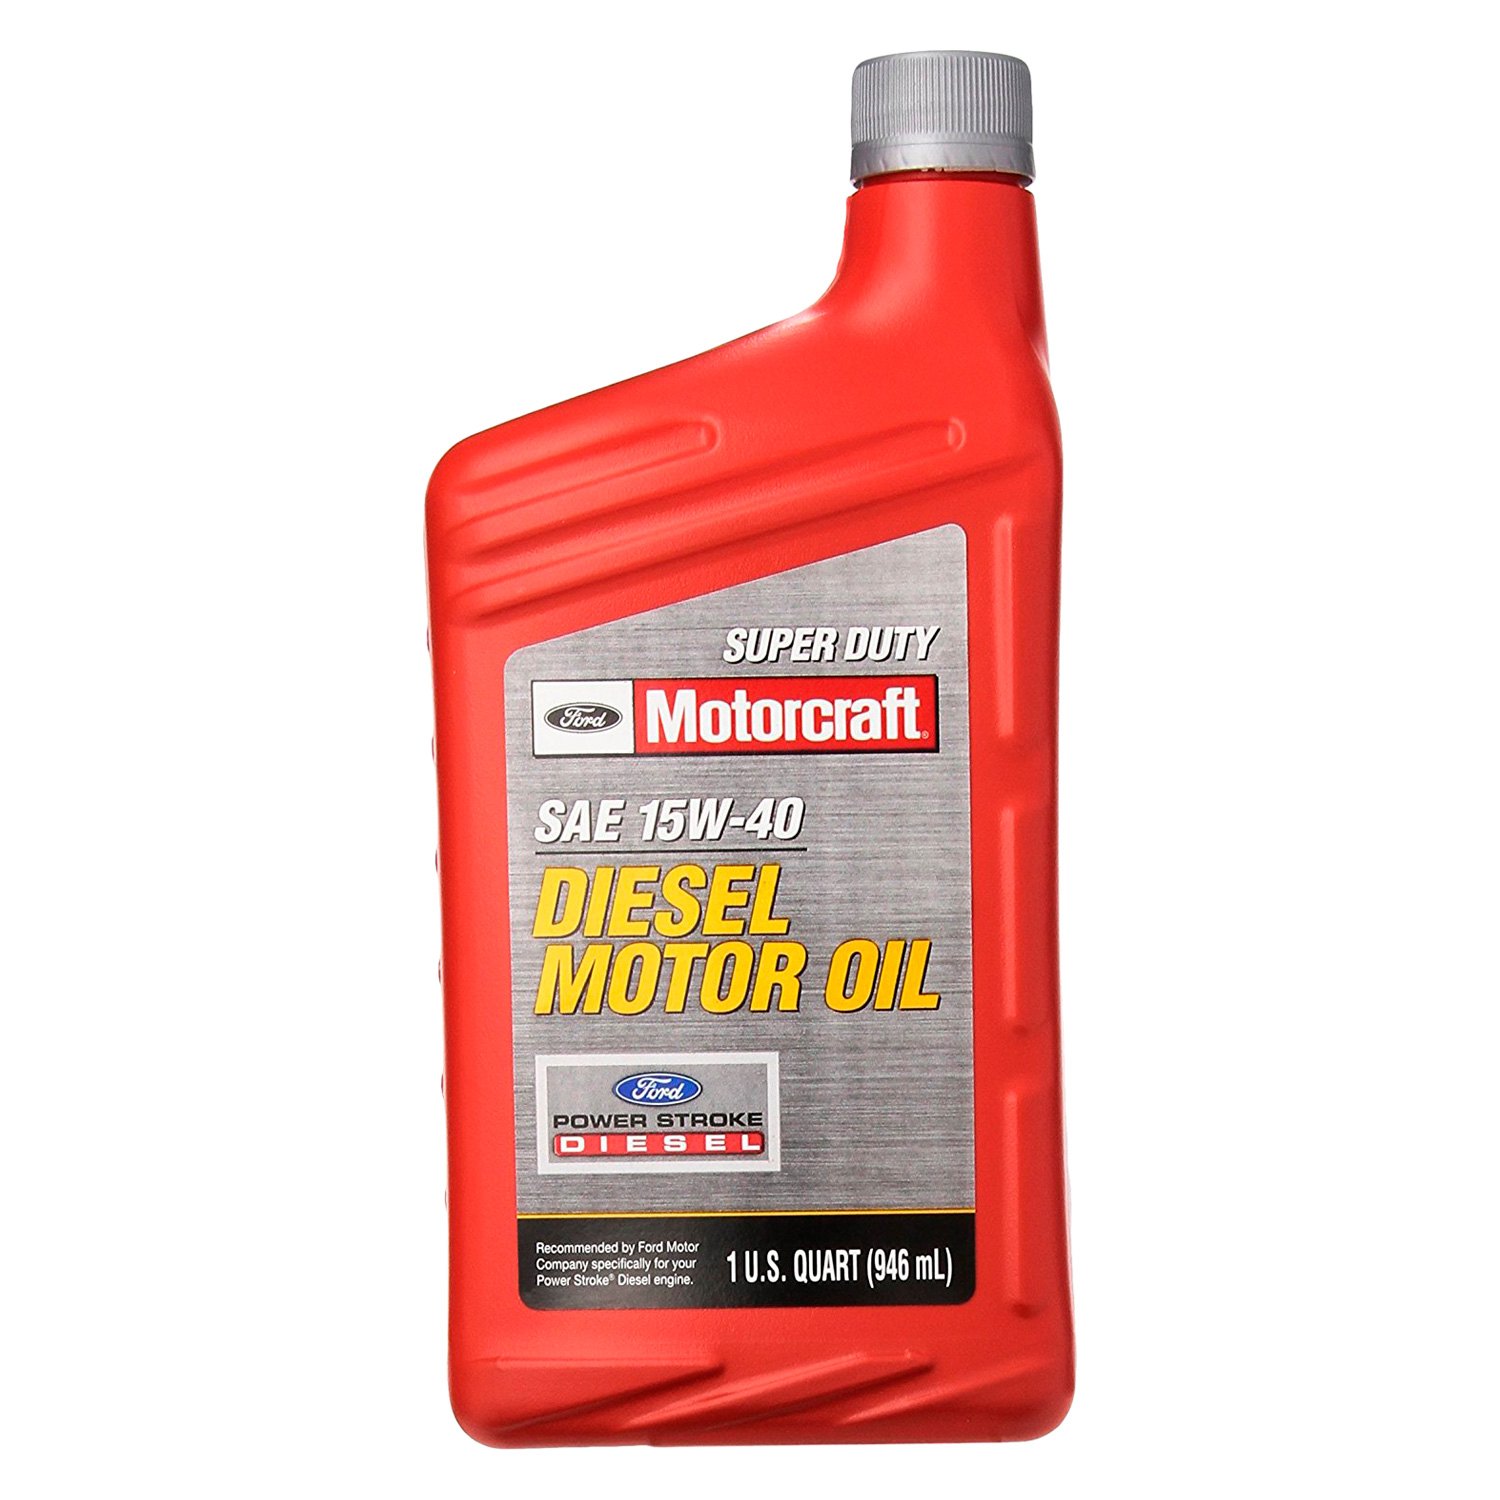 motorcraft full synthetic oil review